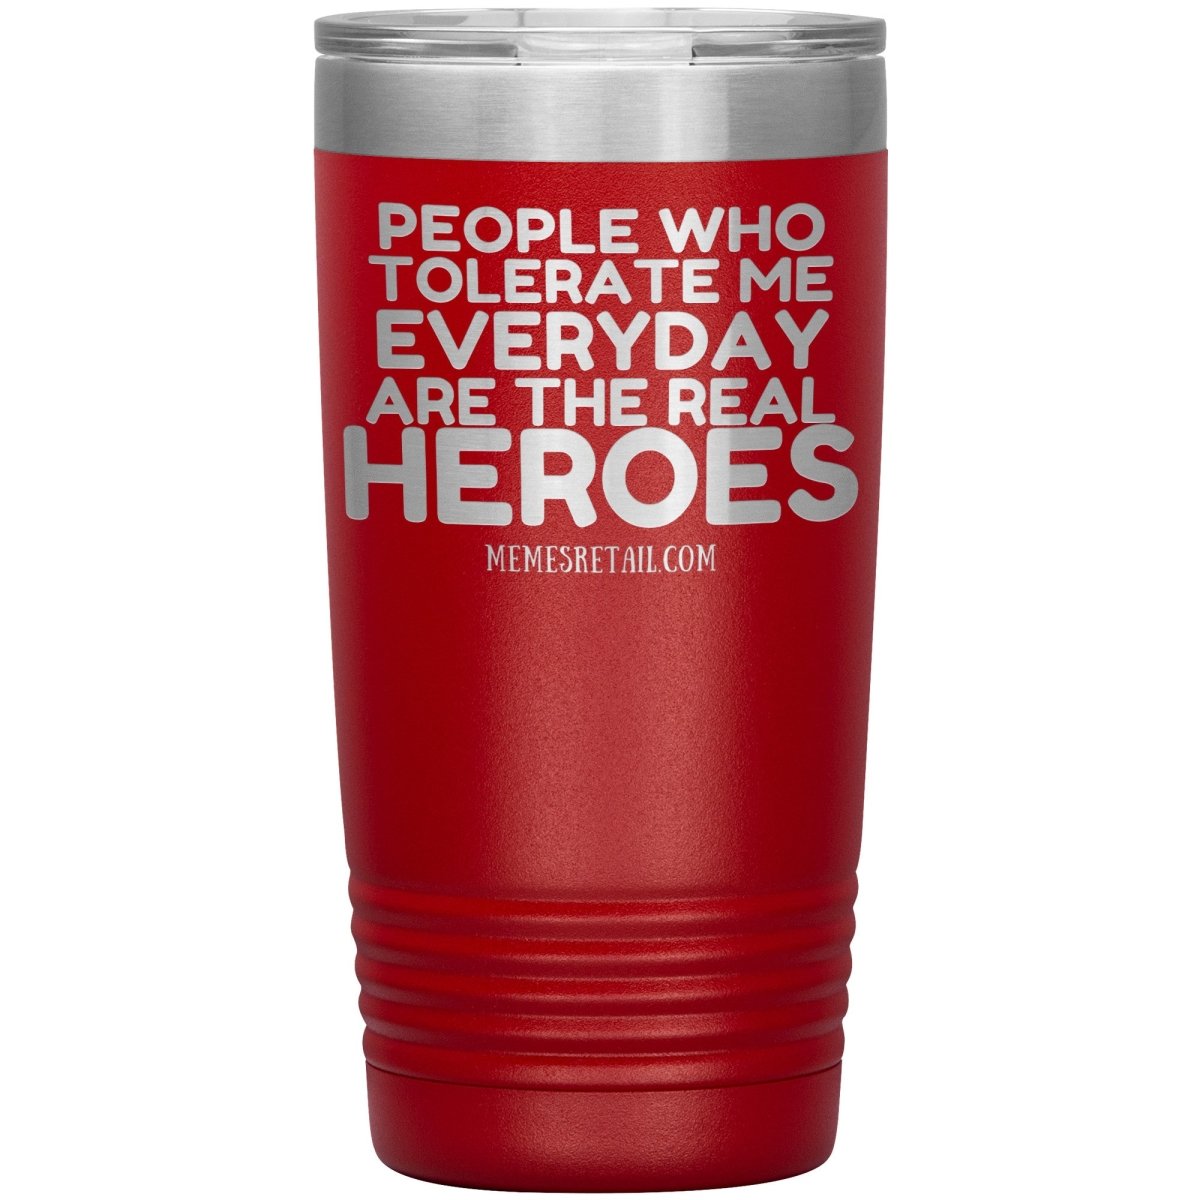 People Who Tolerate Me Everyday Are The Real Heroes Tumblers, 20oz Insulated Tumbler / Red - MemesRetail.com